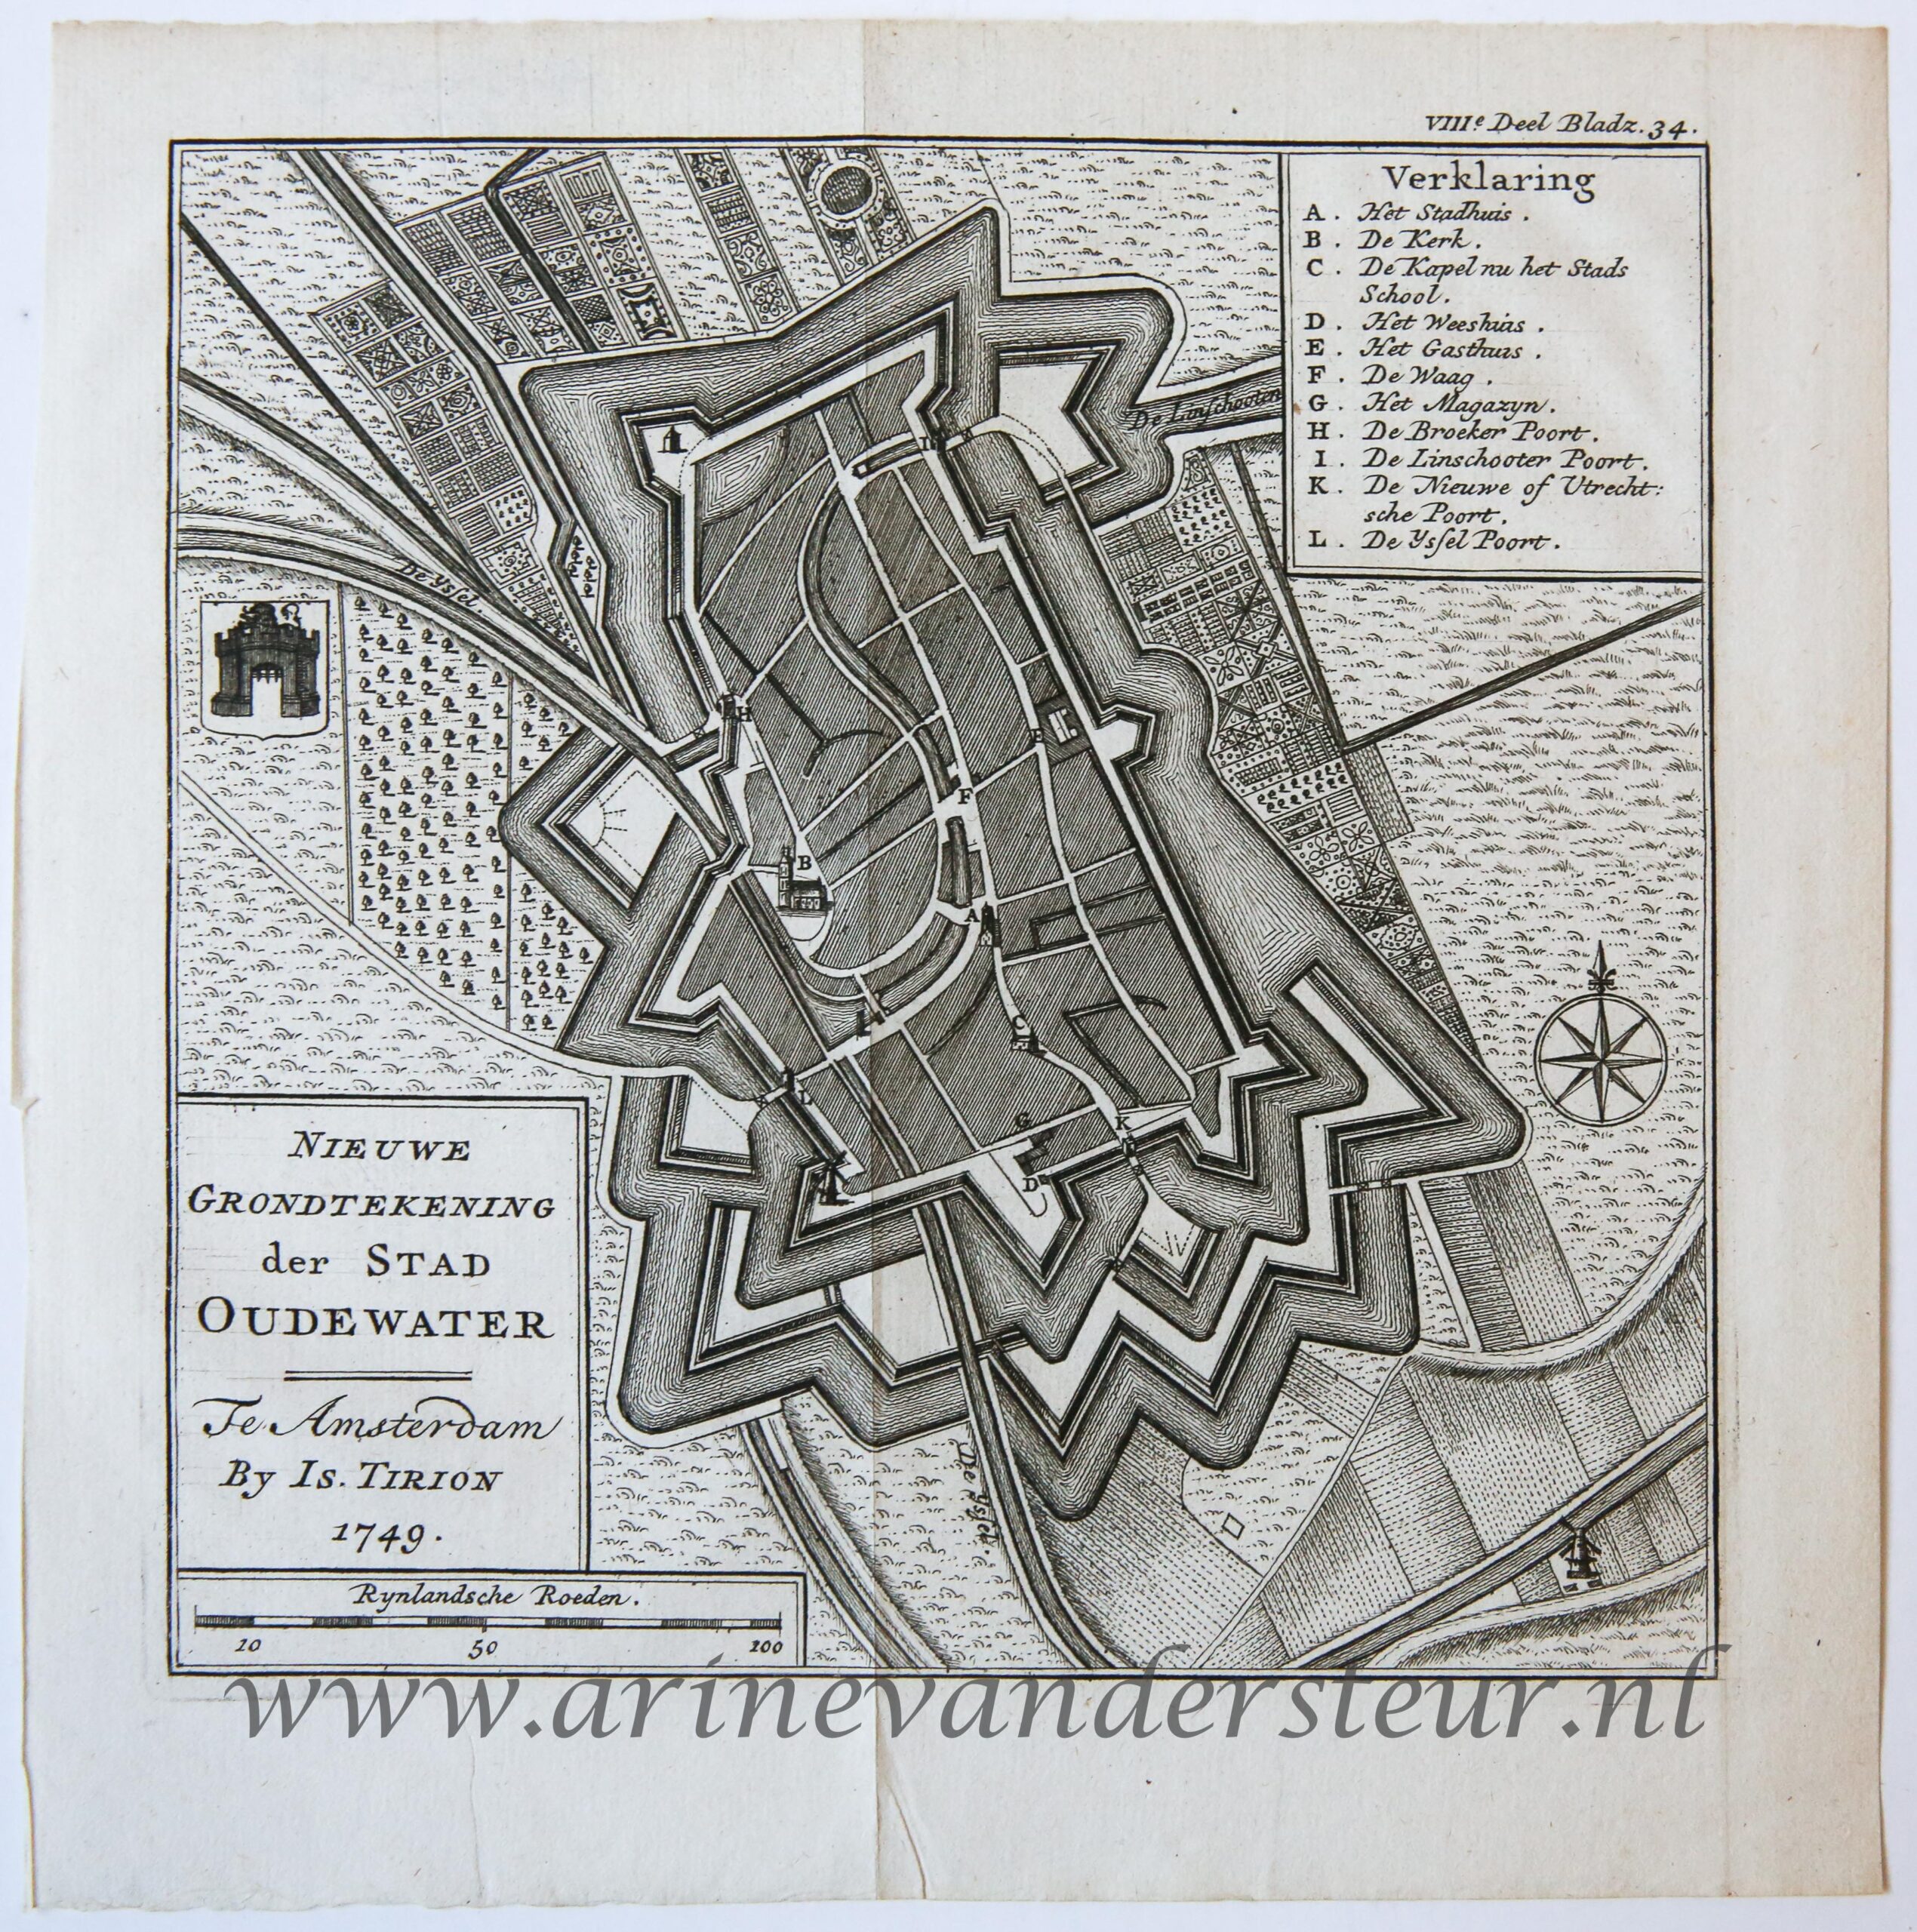 [Cartography, antique print, etching] Map of Oudewater (Oude kaart van Oudewater), published 1749.